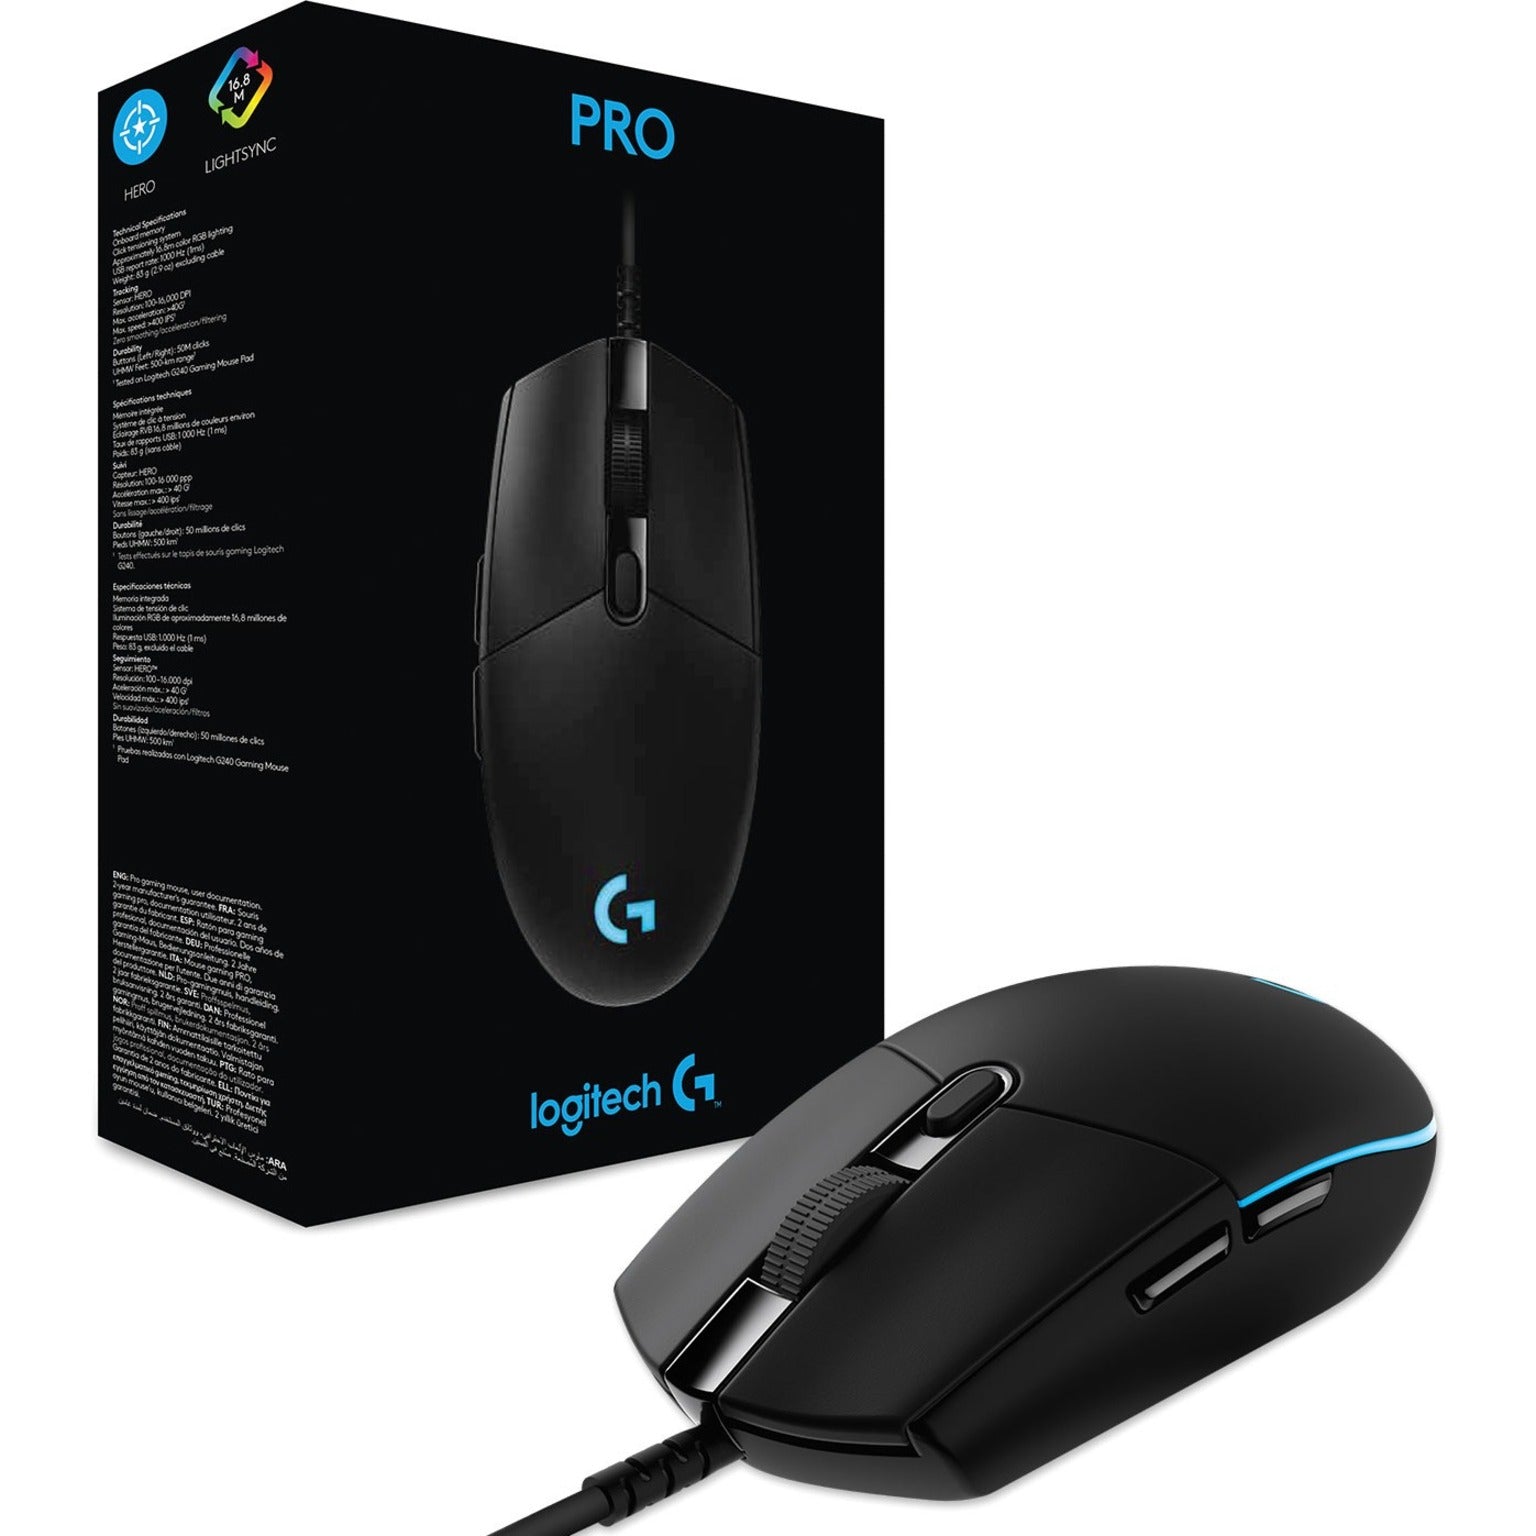 Logitech 910-005439 Pro Gaming Mouse, 16000 dpi Optical, 6 Buttons, USB